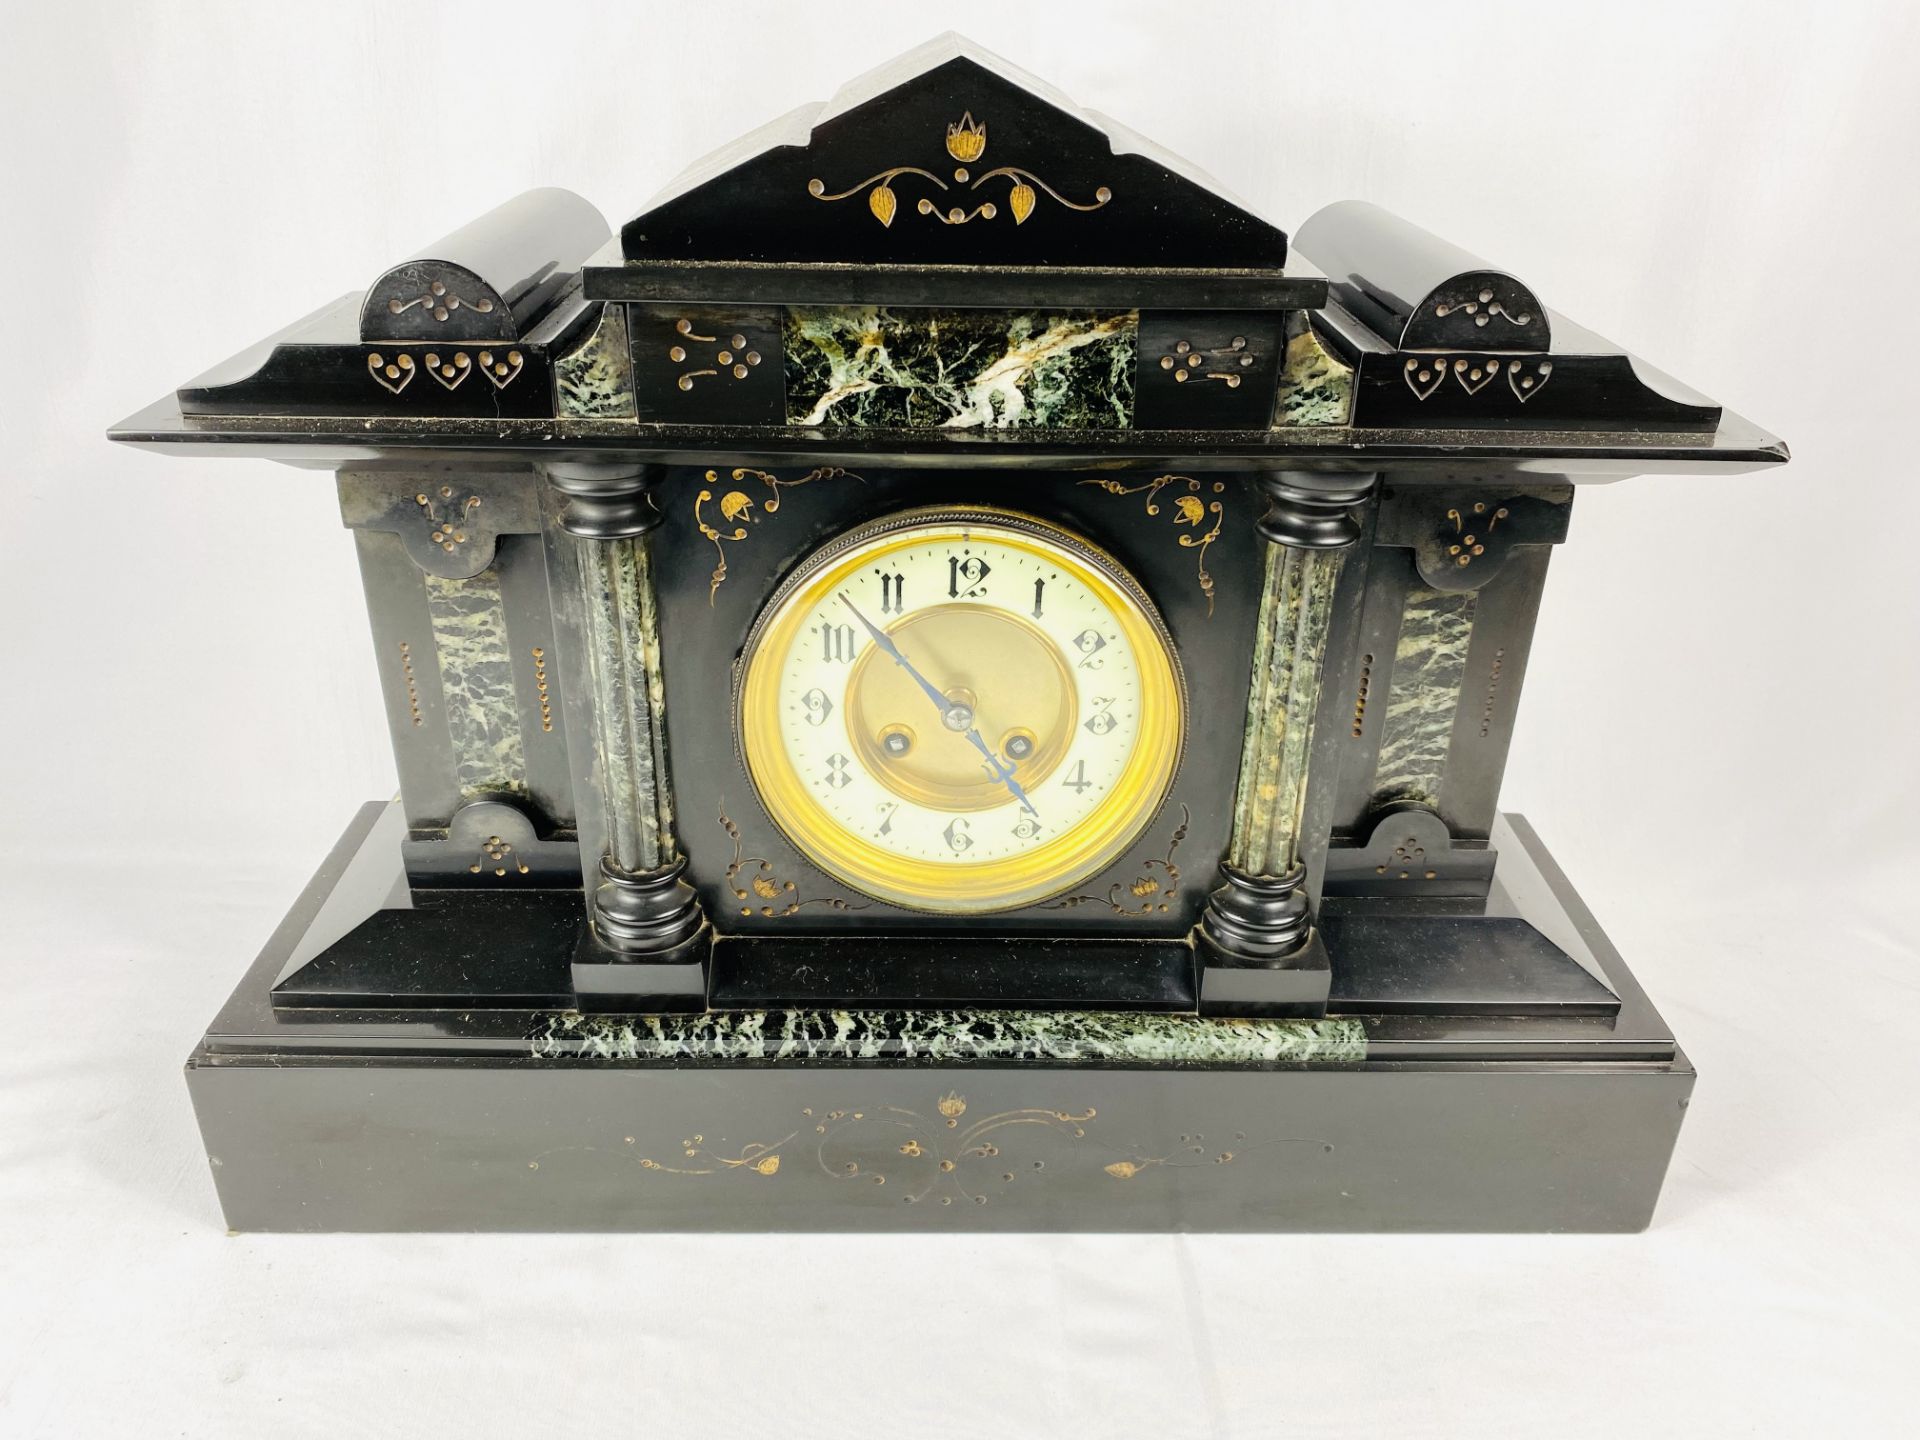 Slate cased mantel clock together with a mahogany mantel clock